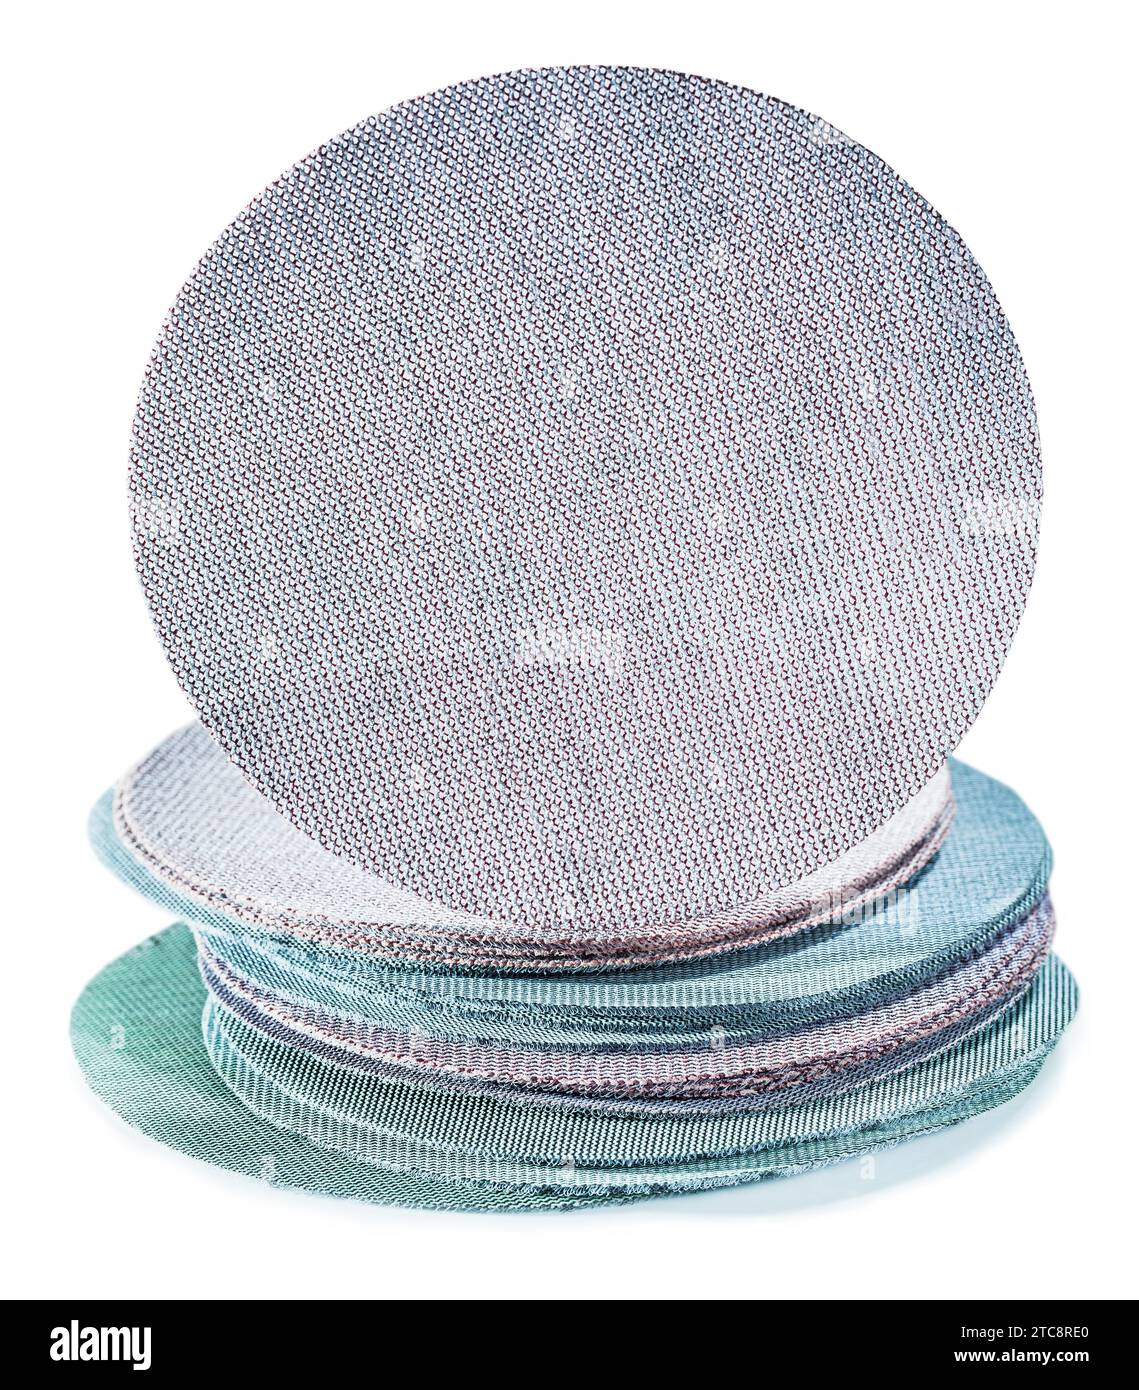 Sanding tools Adhesive dust-free sanding discs Stack with Randoms grits isolated Stock Photo